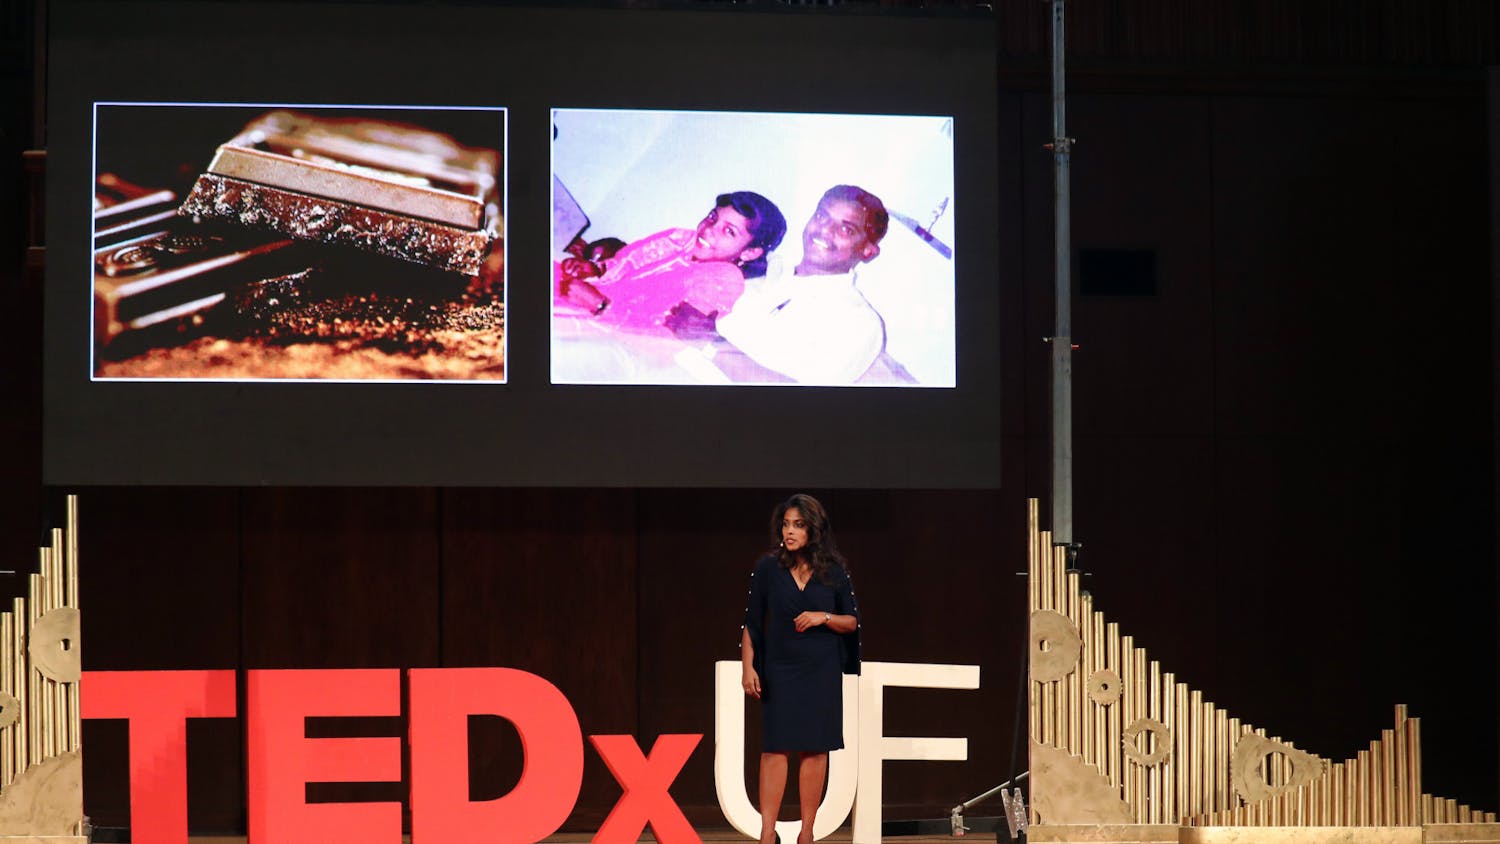 Dr. Sarah Jayasekaran, an assistant engineering professor at UF, shares her educational and personal journey as a Indian immigrant during TEDxUF’s 14th Annual Conference Saturday, April 1, 2023.